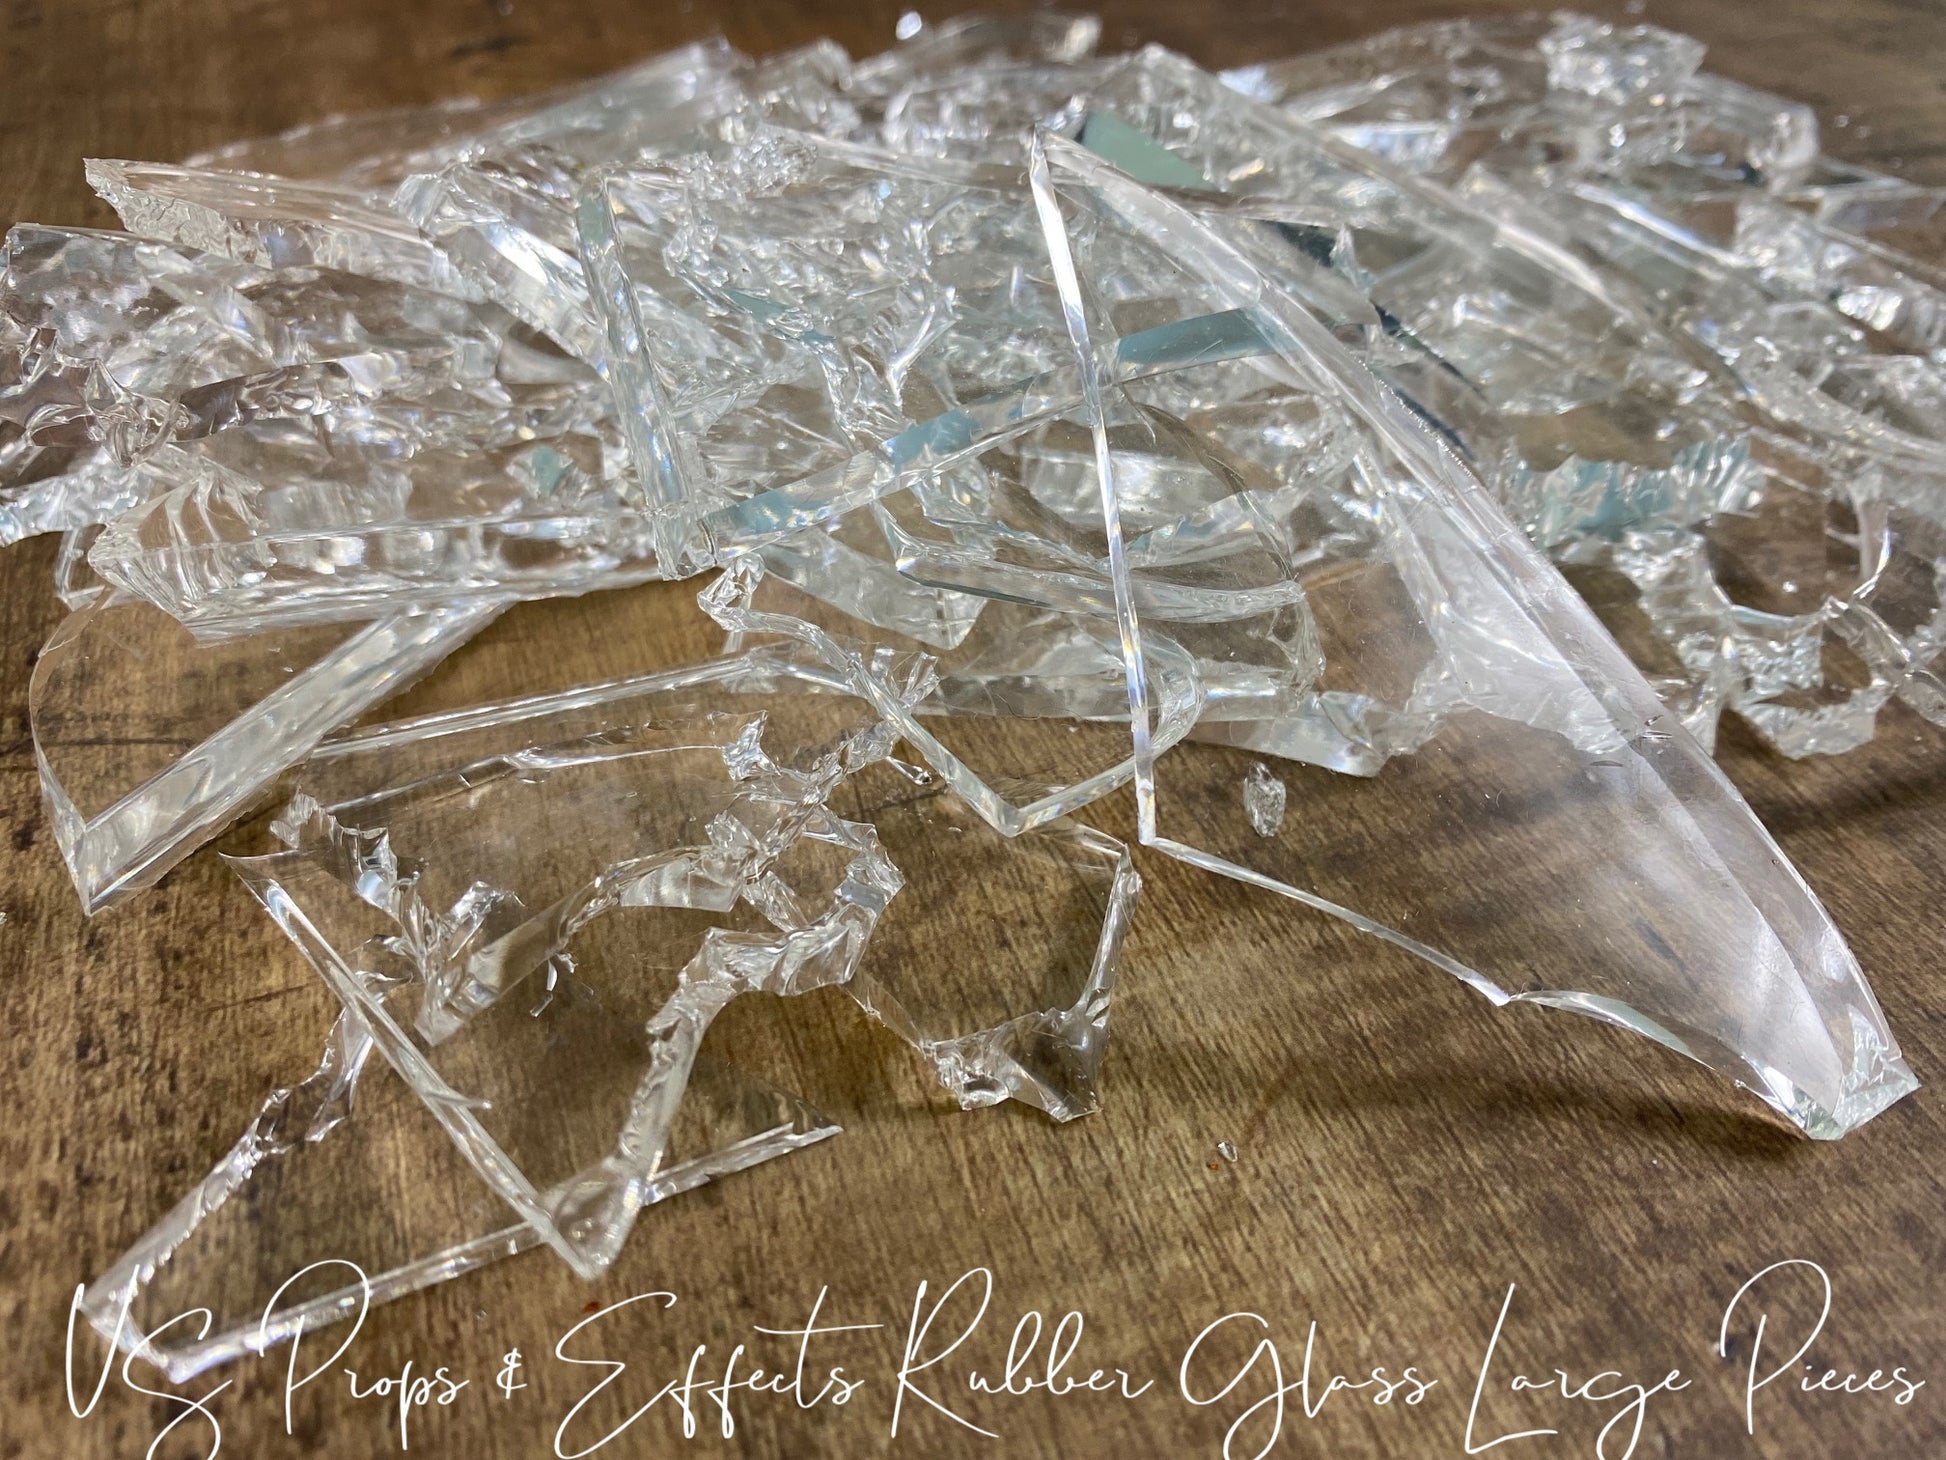 SFX Fake Shattered Rubber Glass. Suitable for Film, Tv or Stage